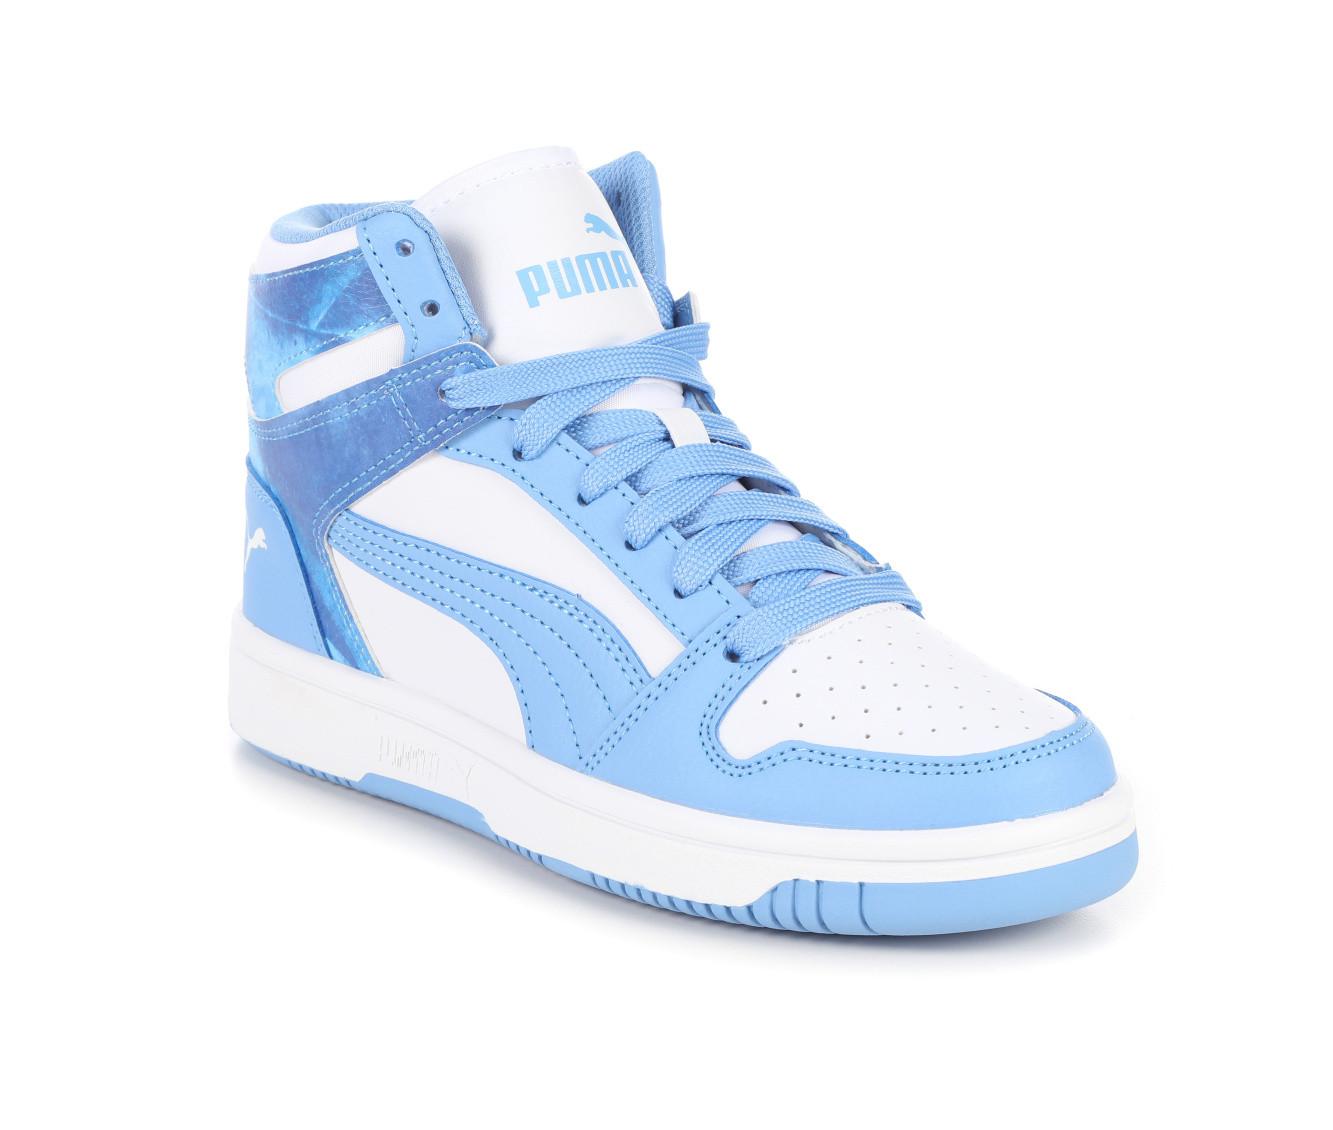 Girls' Puma Big Kid Rebound Lay Up SL First Frost Sneakers